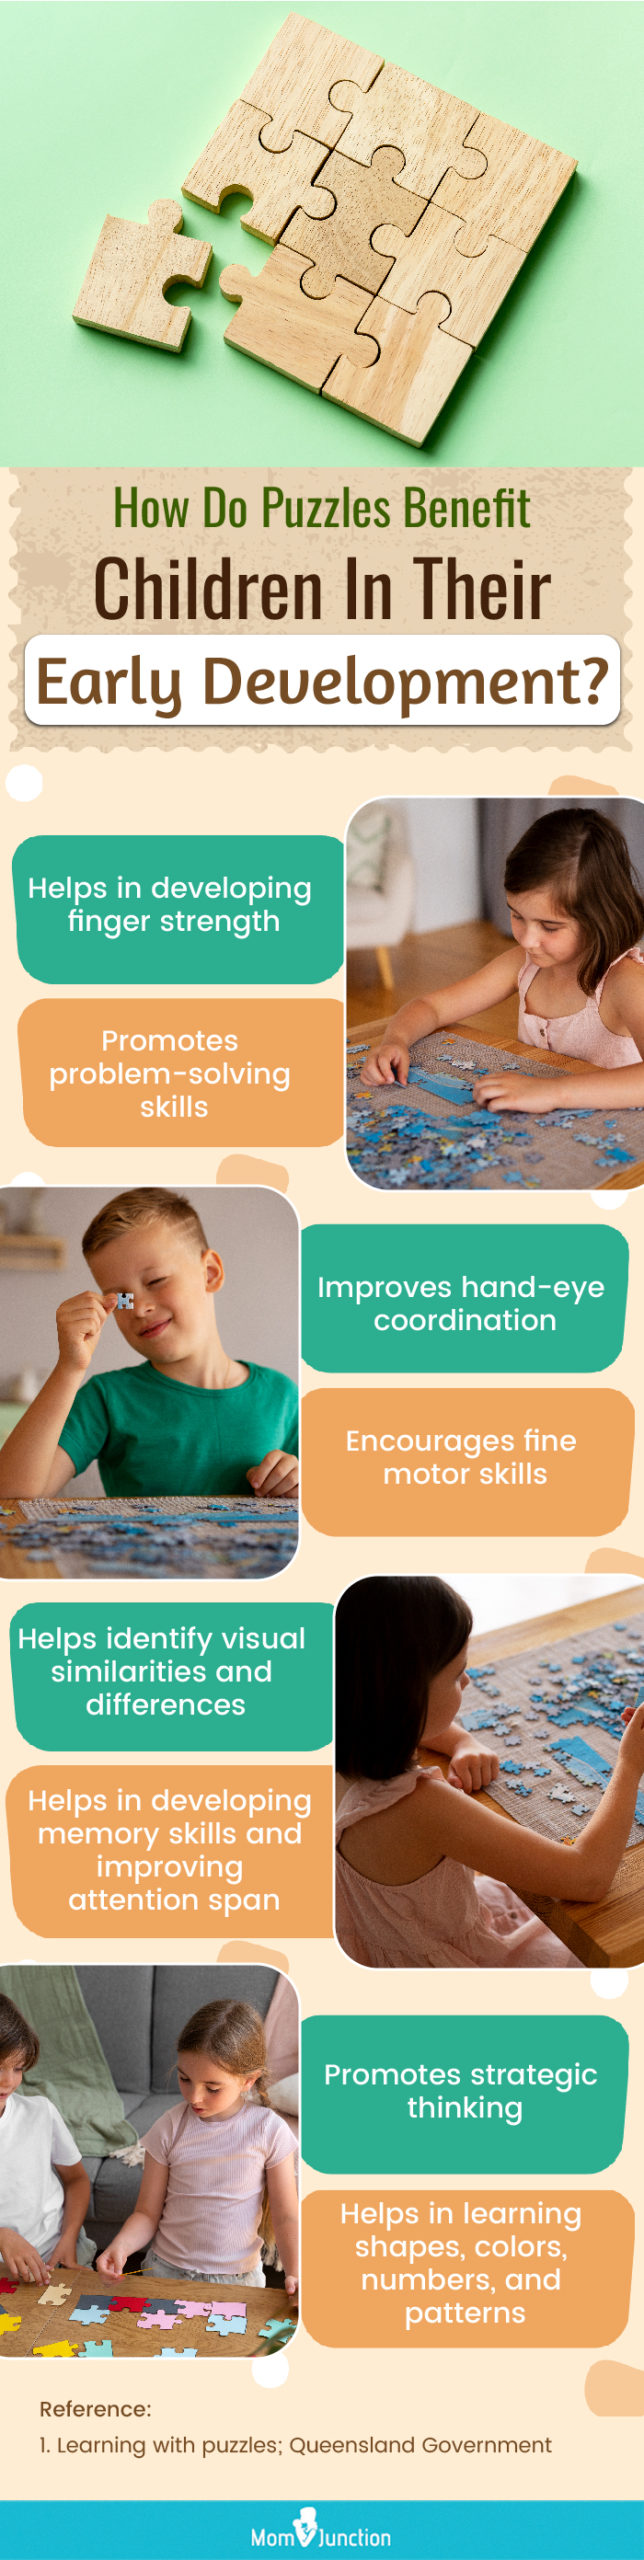 How Do Puzzles Benefit Children In Their Early Development? (infographic)